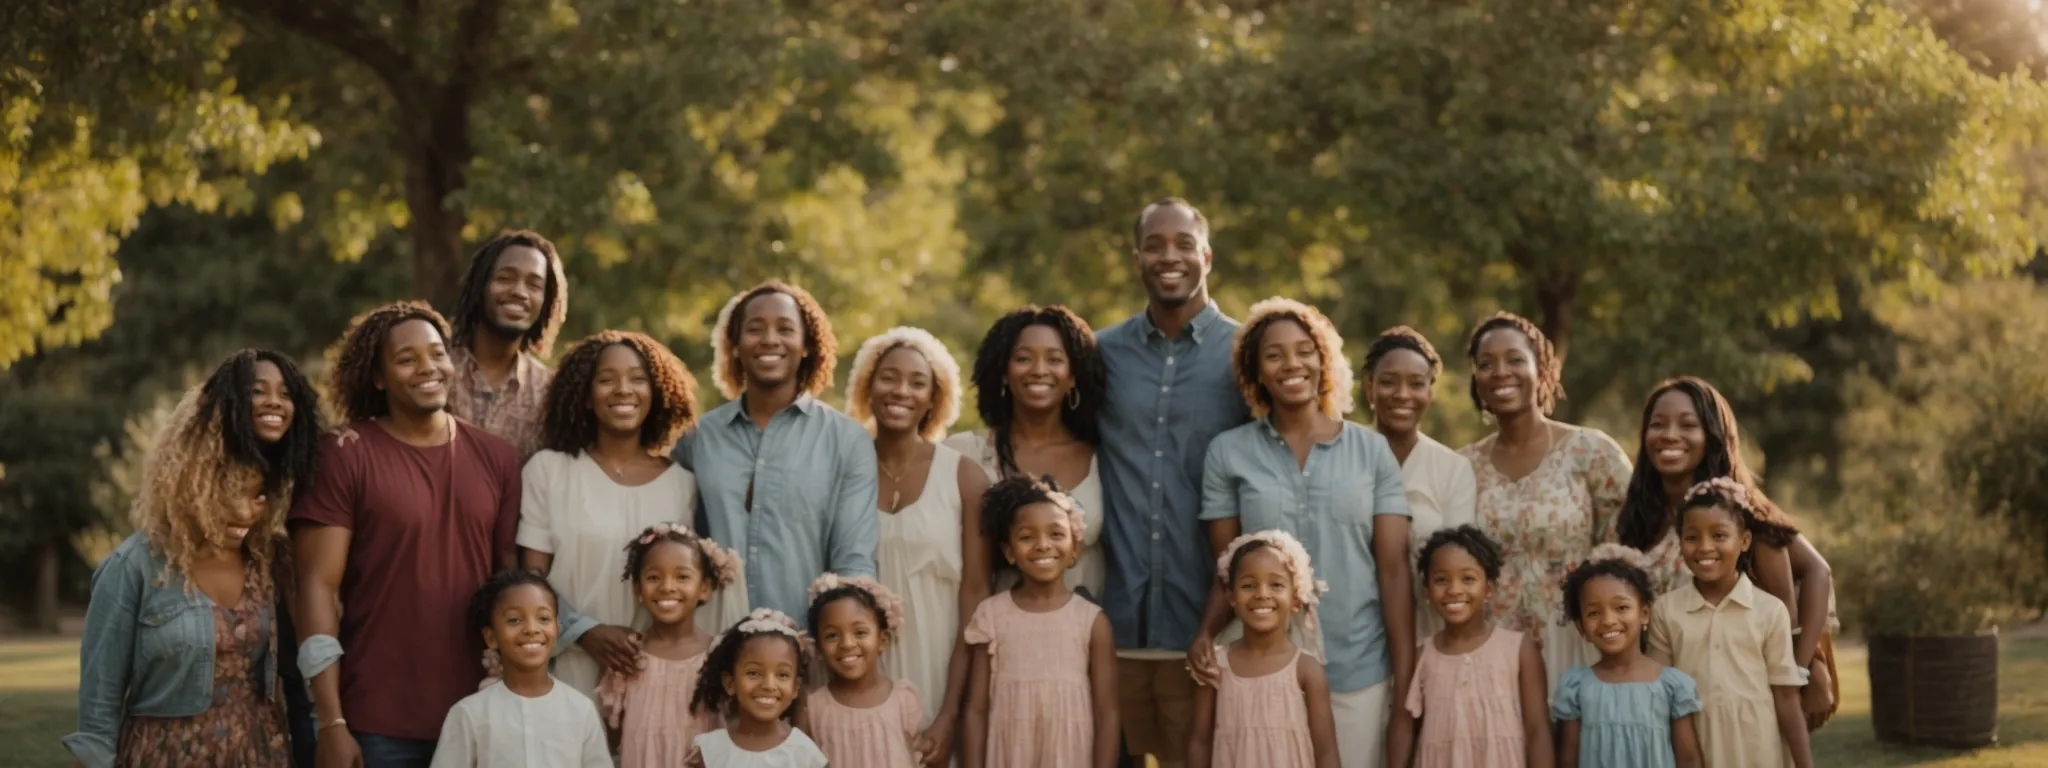 a diverse group of smiling families, each representing a unique adoption journey, gathers in a sunlit park.